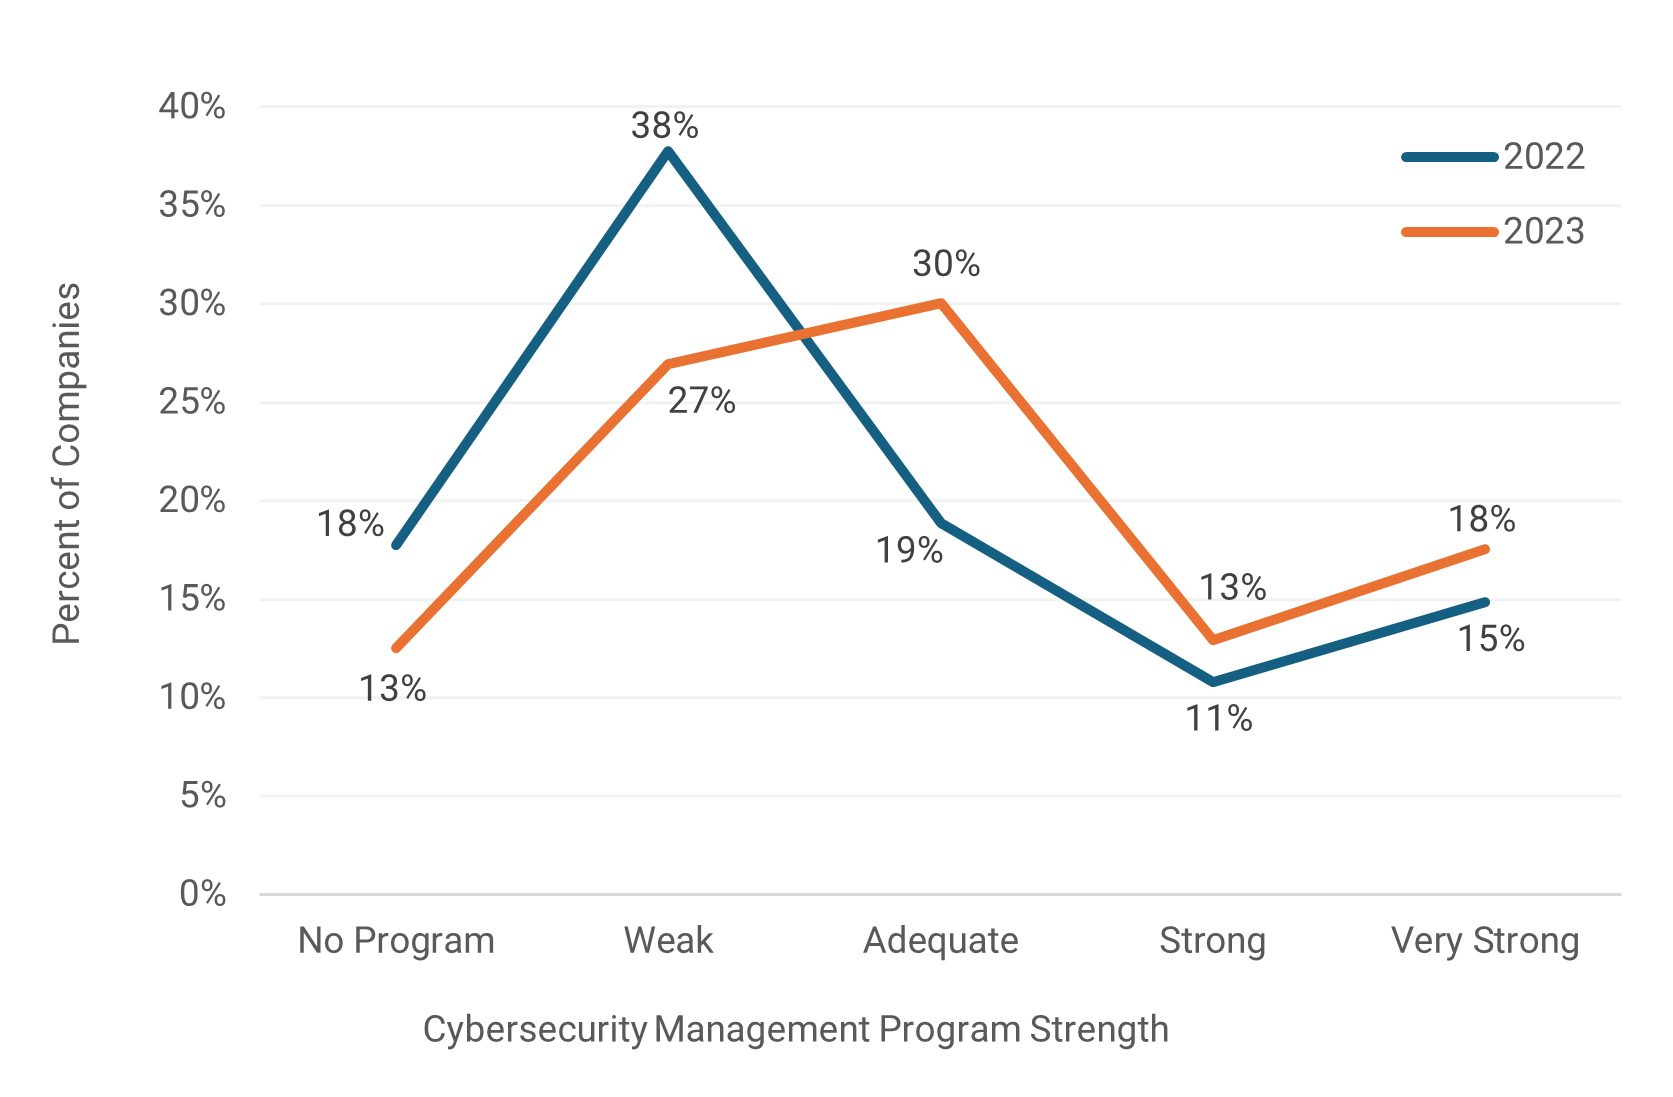 Strength of Cybersecurity Management Programs in the Utilities Sector, 2022 vs 2023